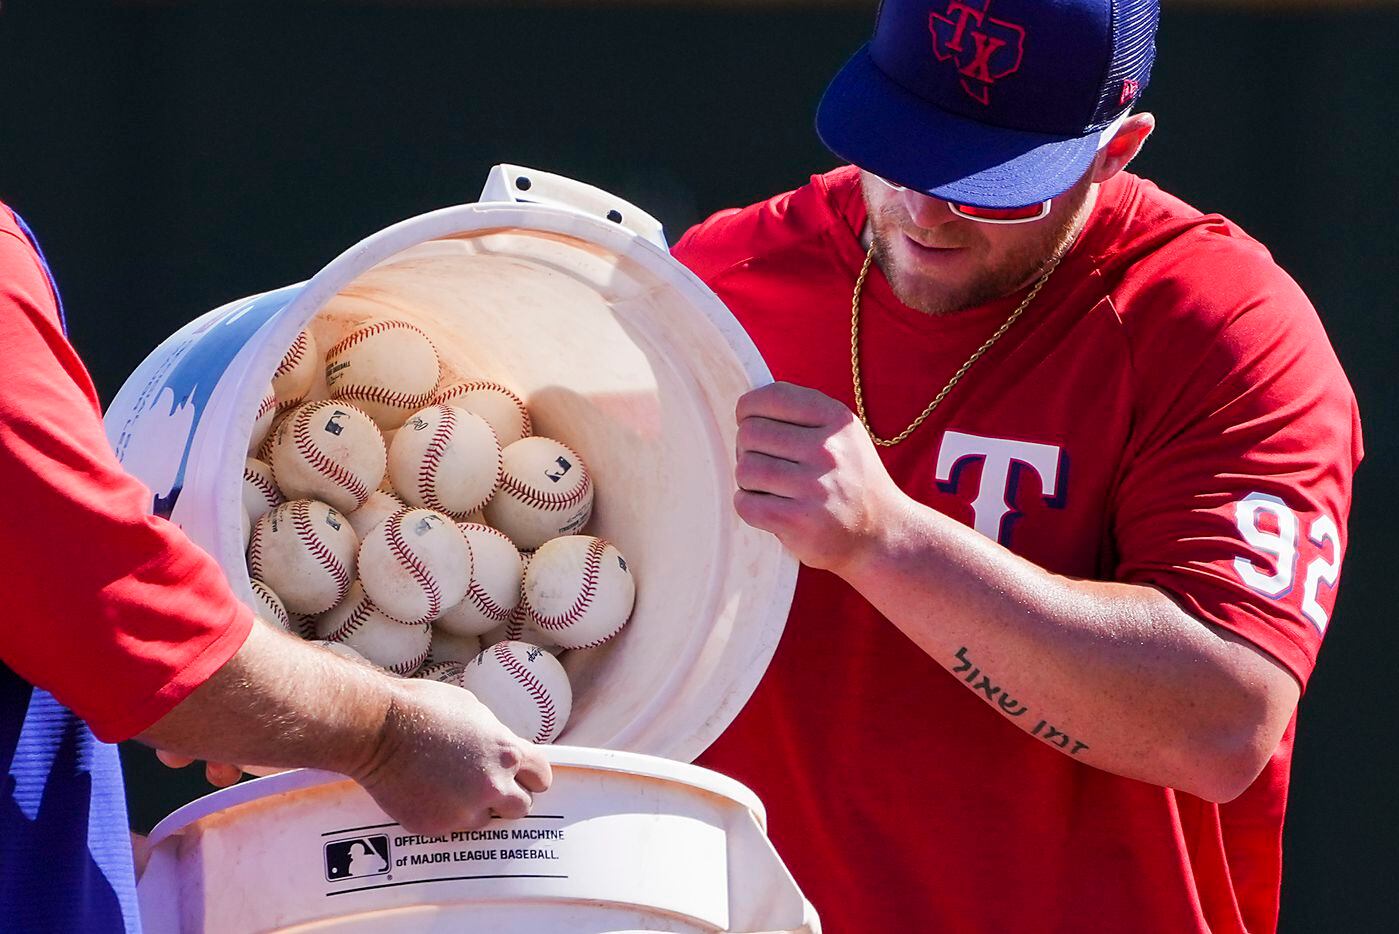 Texas Rangers infielder Blaine Crim dumps a bucket of balls while taking grounders during a...